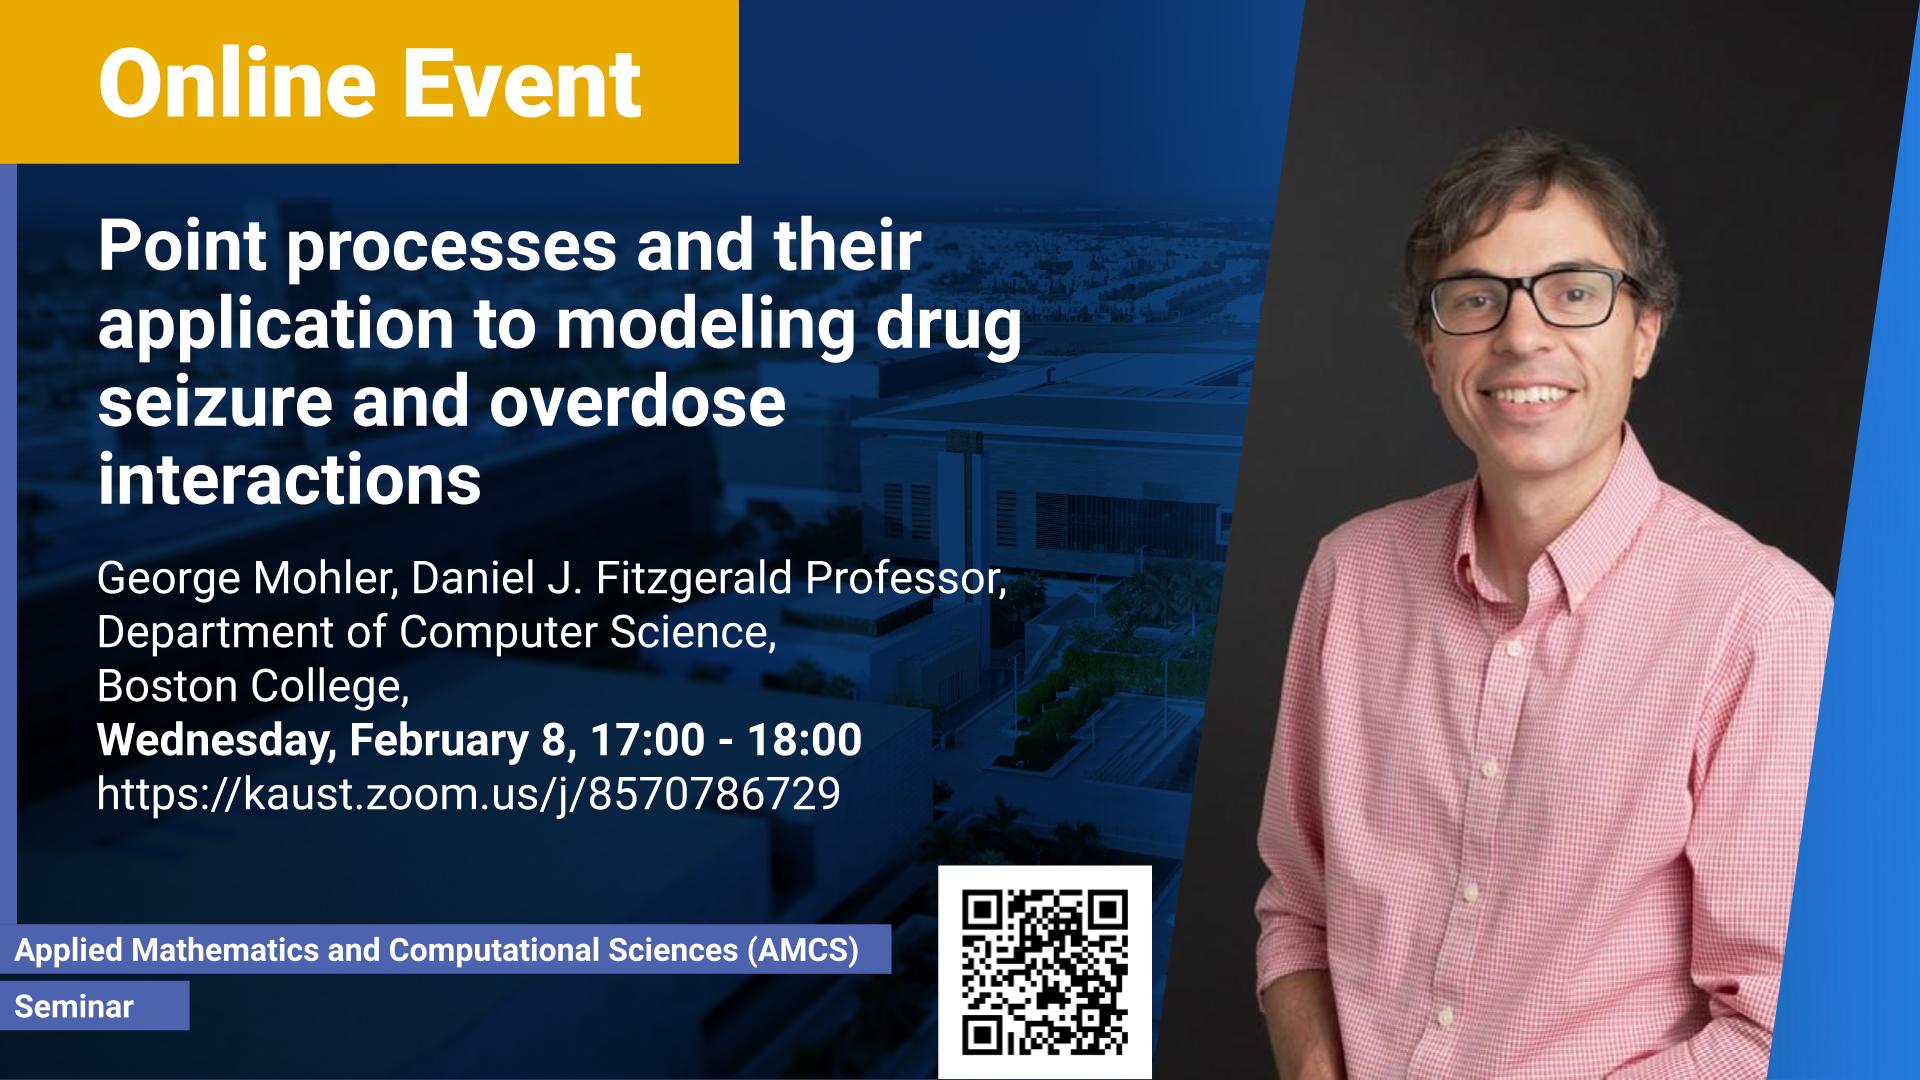 KAUST CEMSE AMCS SIAM Seminar George Mohler Point processes and their application to modeling drug seizure and overdose interactions